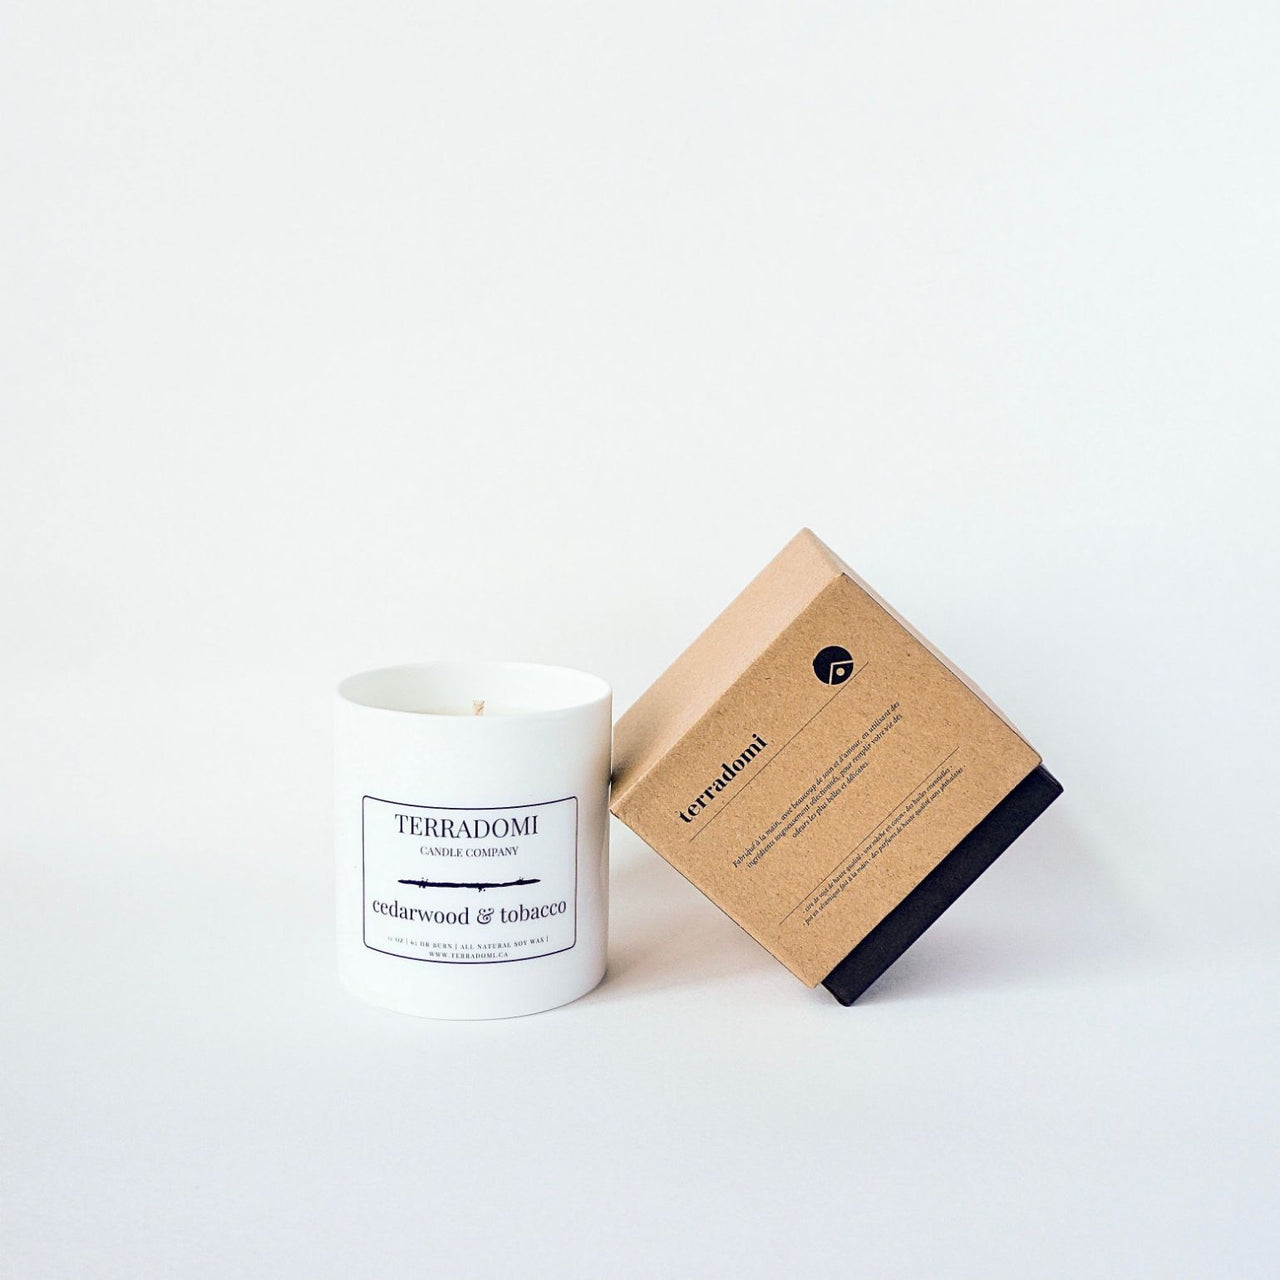 Cedarwood and tobacco scent candle by Terradomi